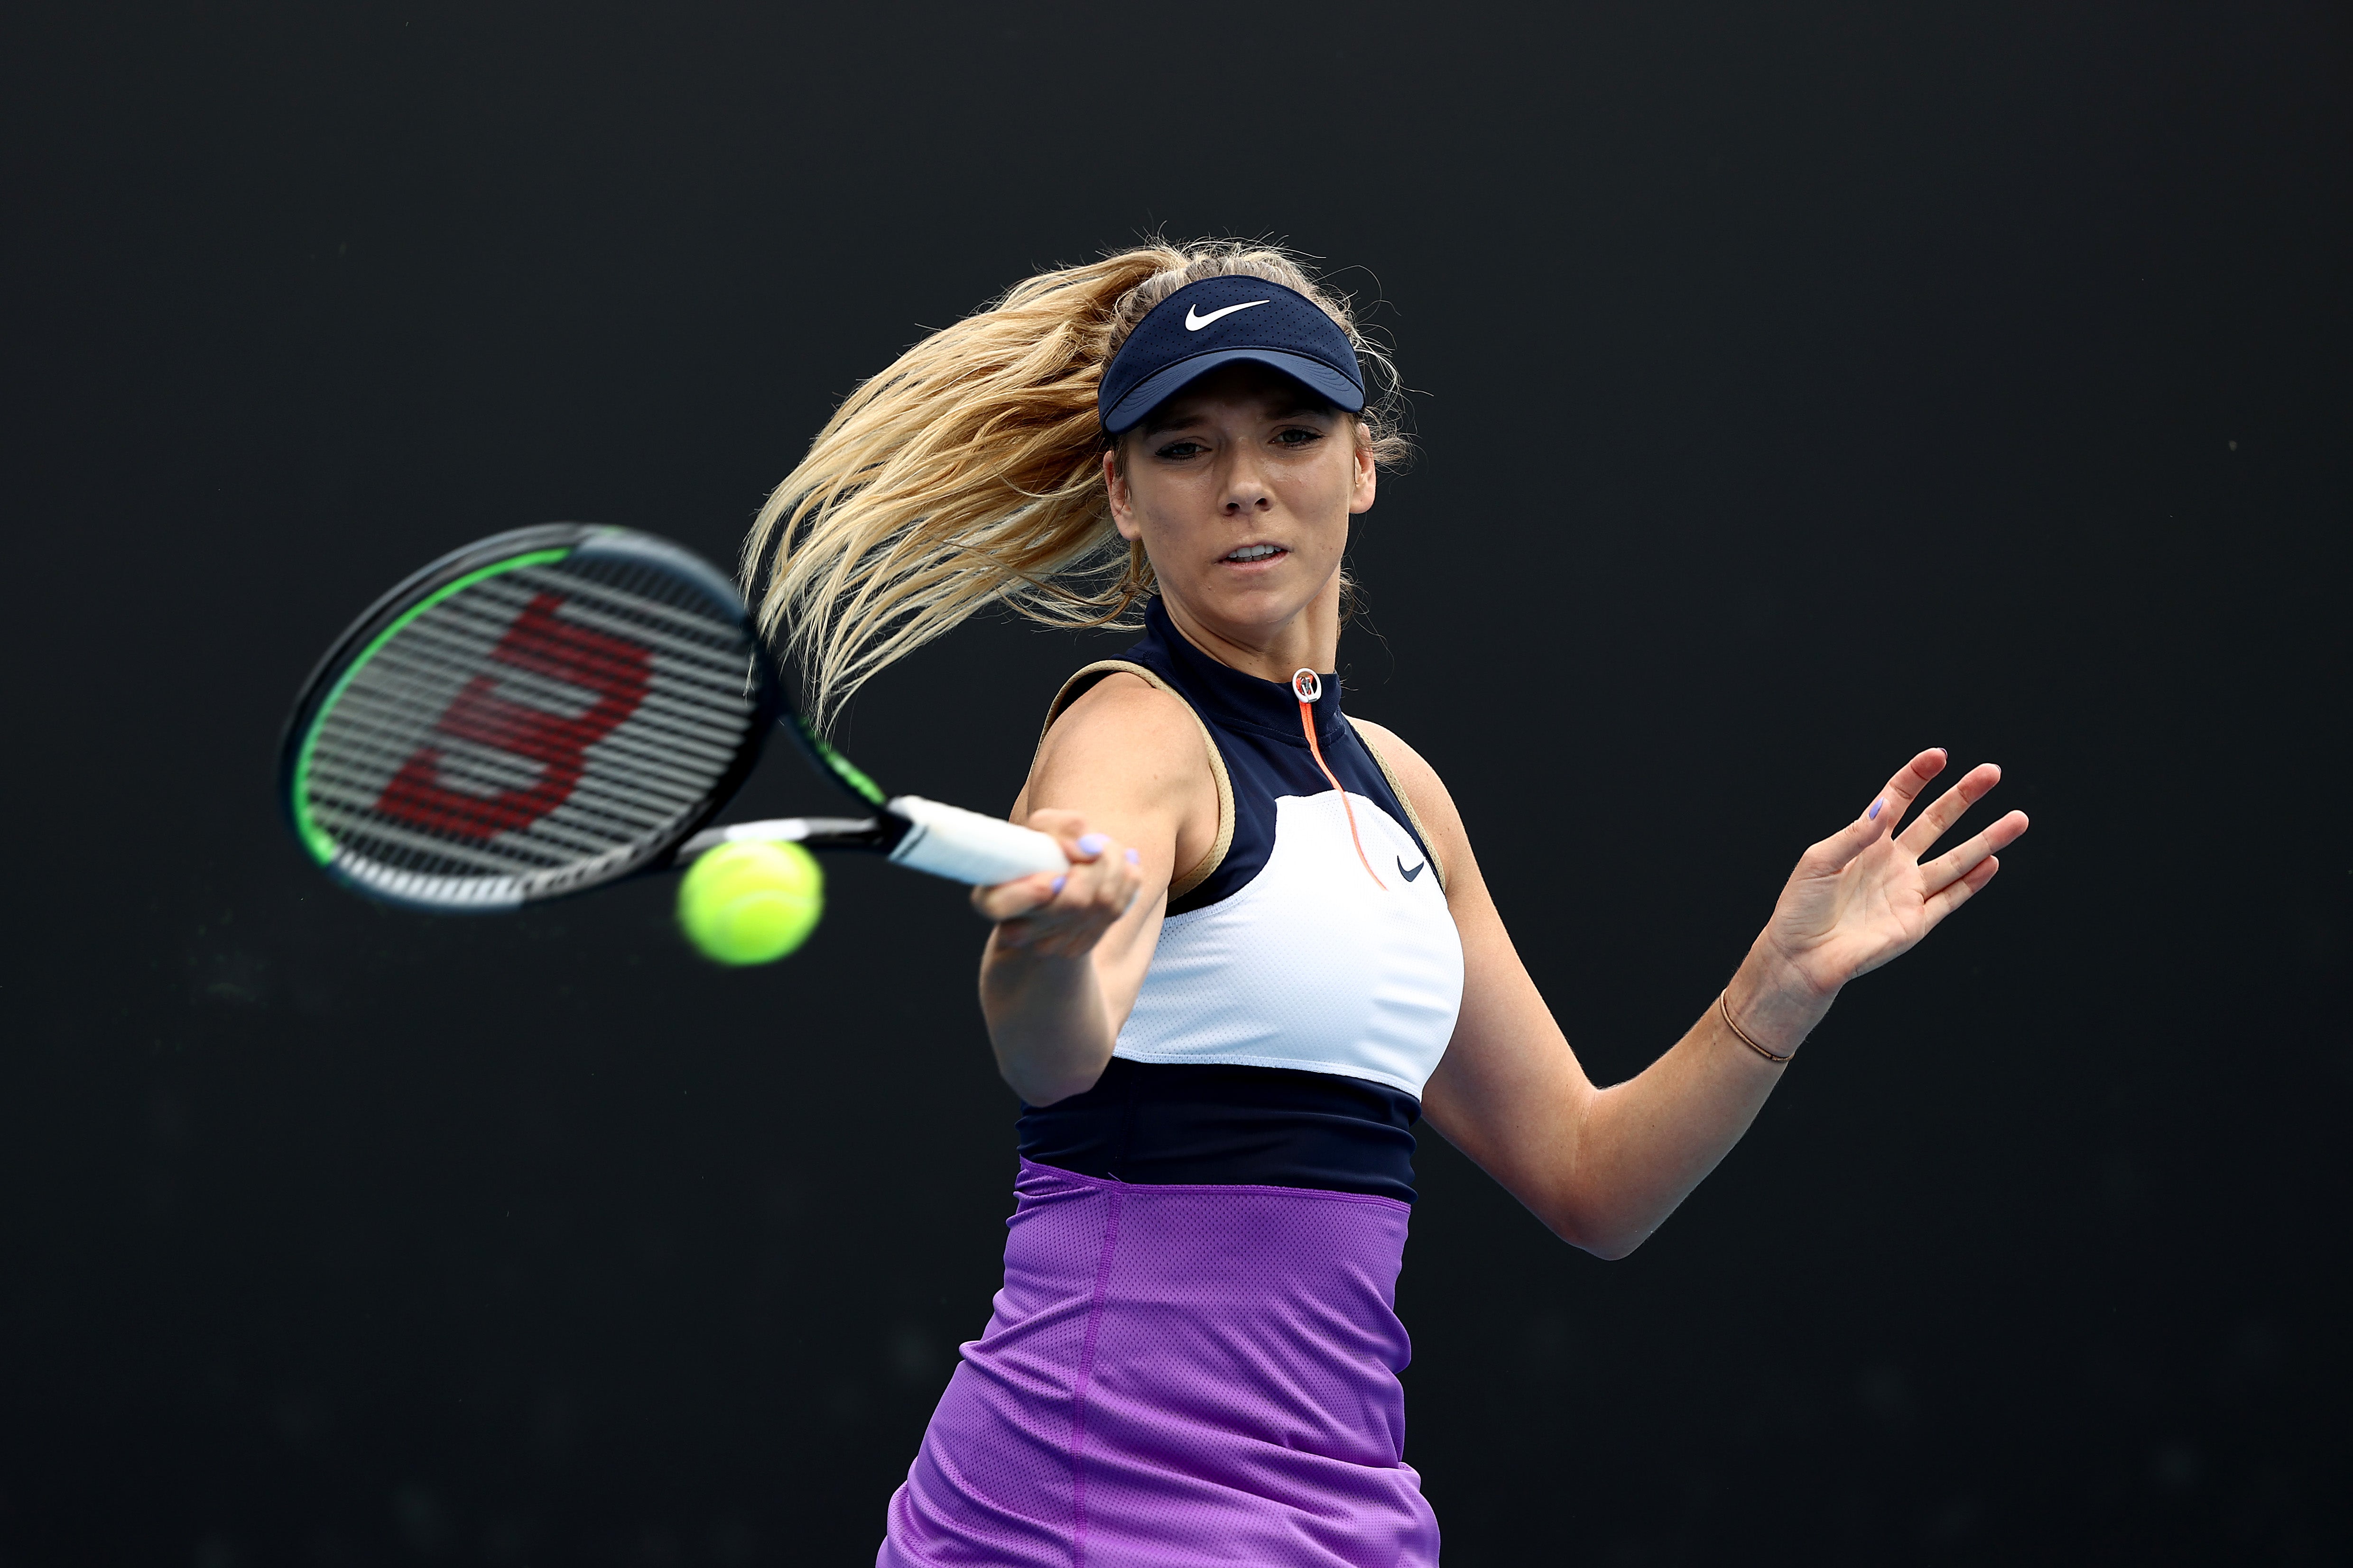 Katie Boulter received treatment during the match